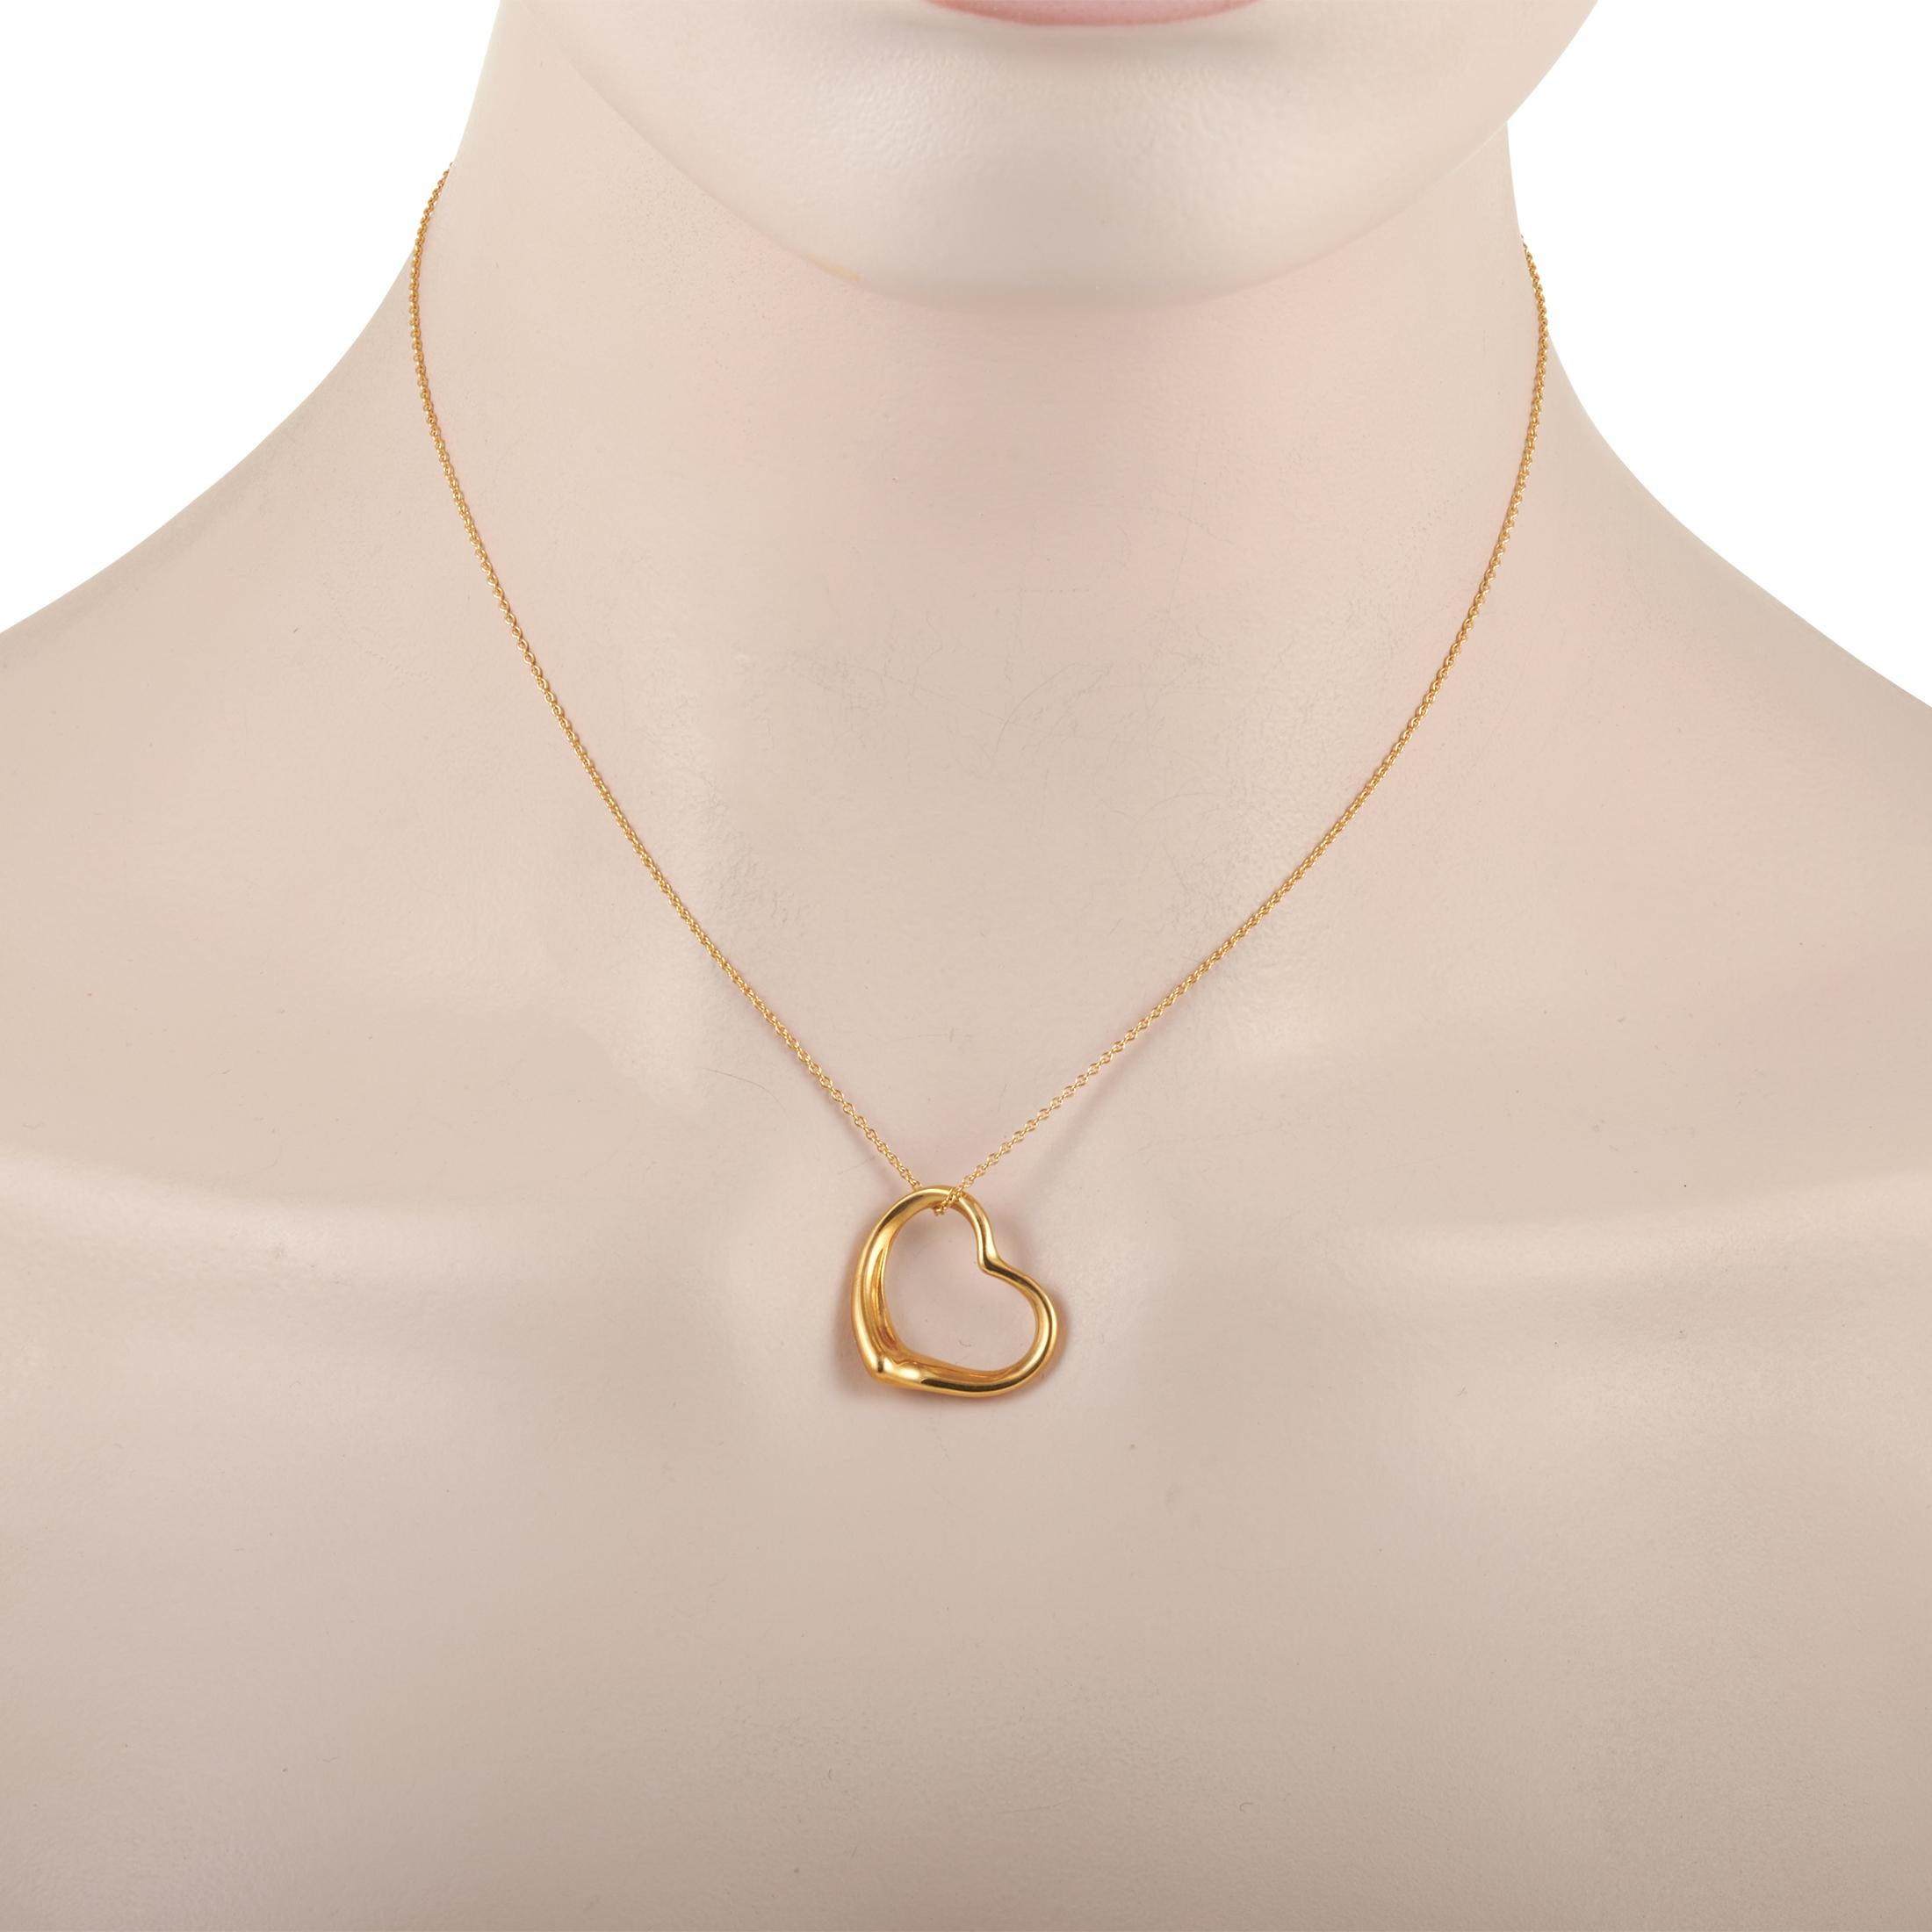 Dainty, lightweight, and pretty, the Tiffany & Co. 18K Yellow Gold Elsa Peretti Open Heart Necklace is the accessory you can wear everywhere and with any outfit. This piece of jewelry features a sculpted outline of a heart finished with a polished